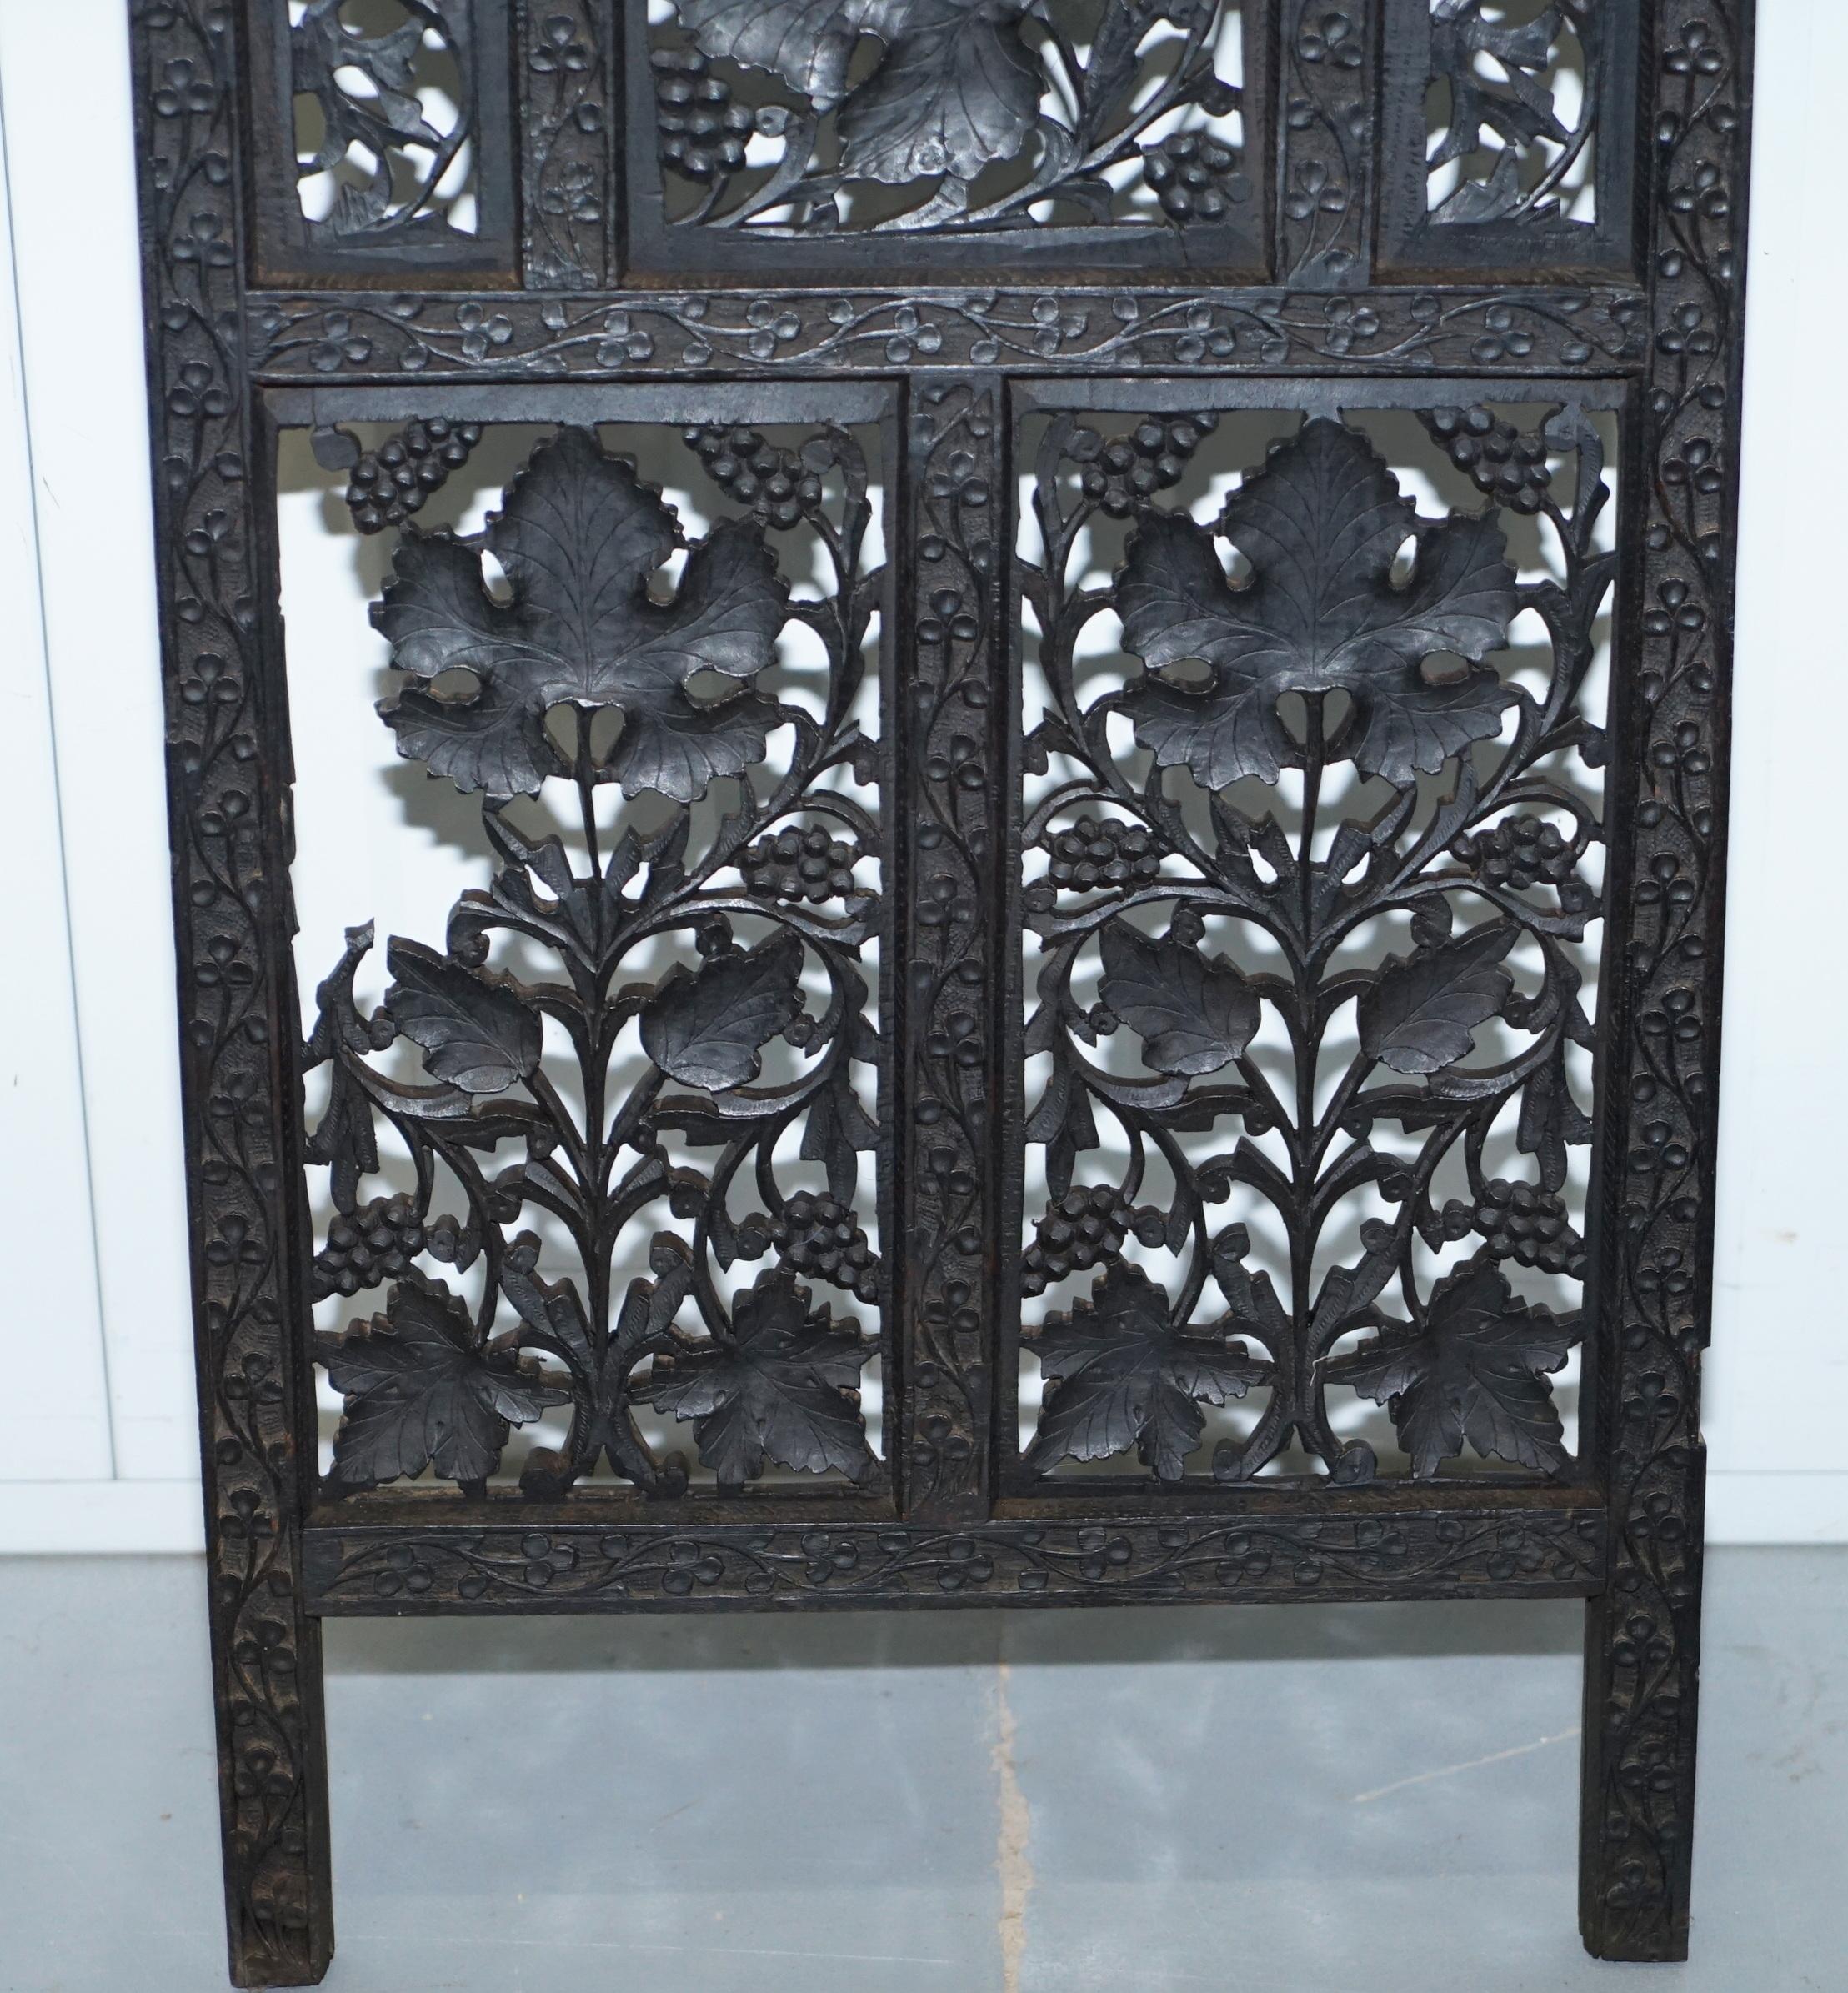 Rare Chinese Fretwork Carved Wall Panels Depicting Leaves Solid Teak Art Wood 12